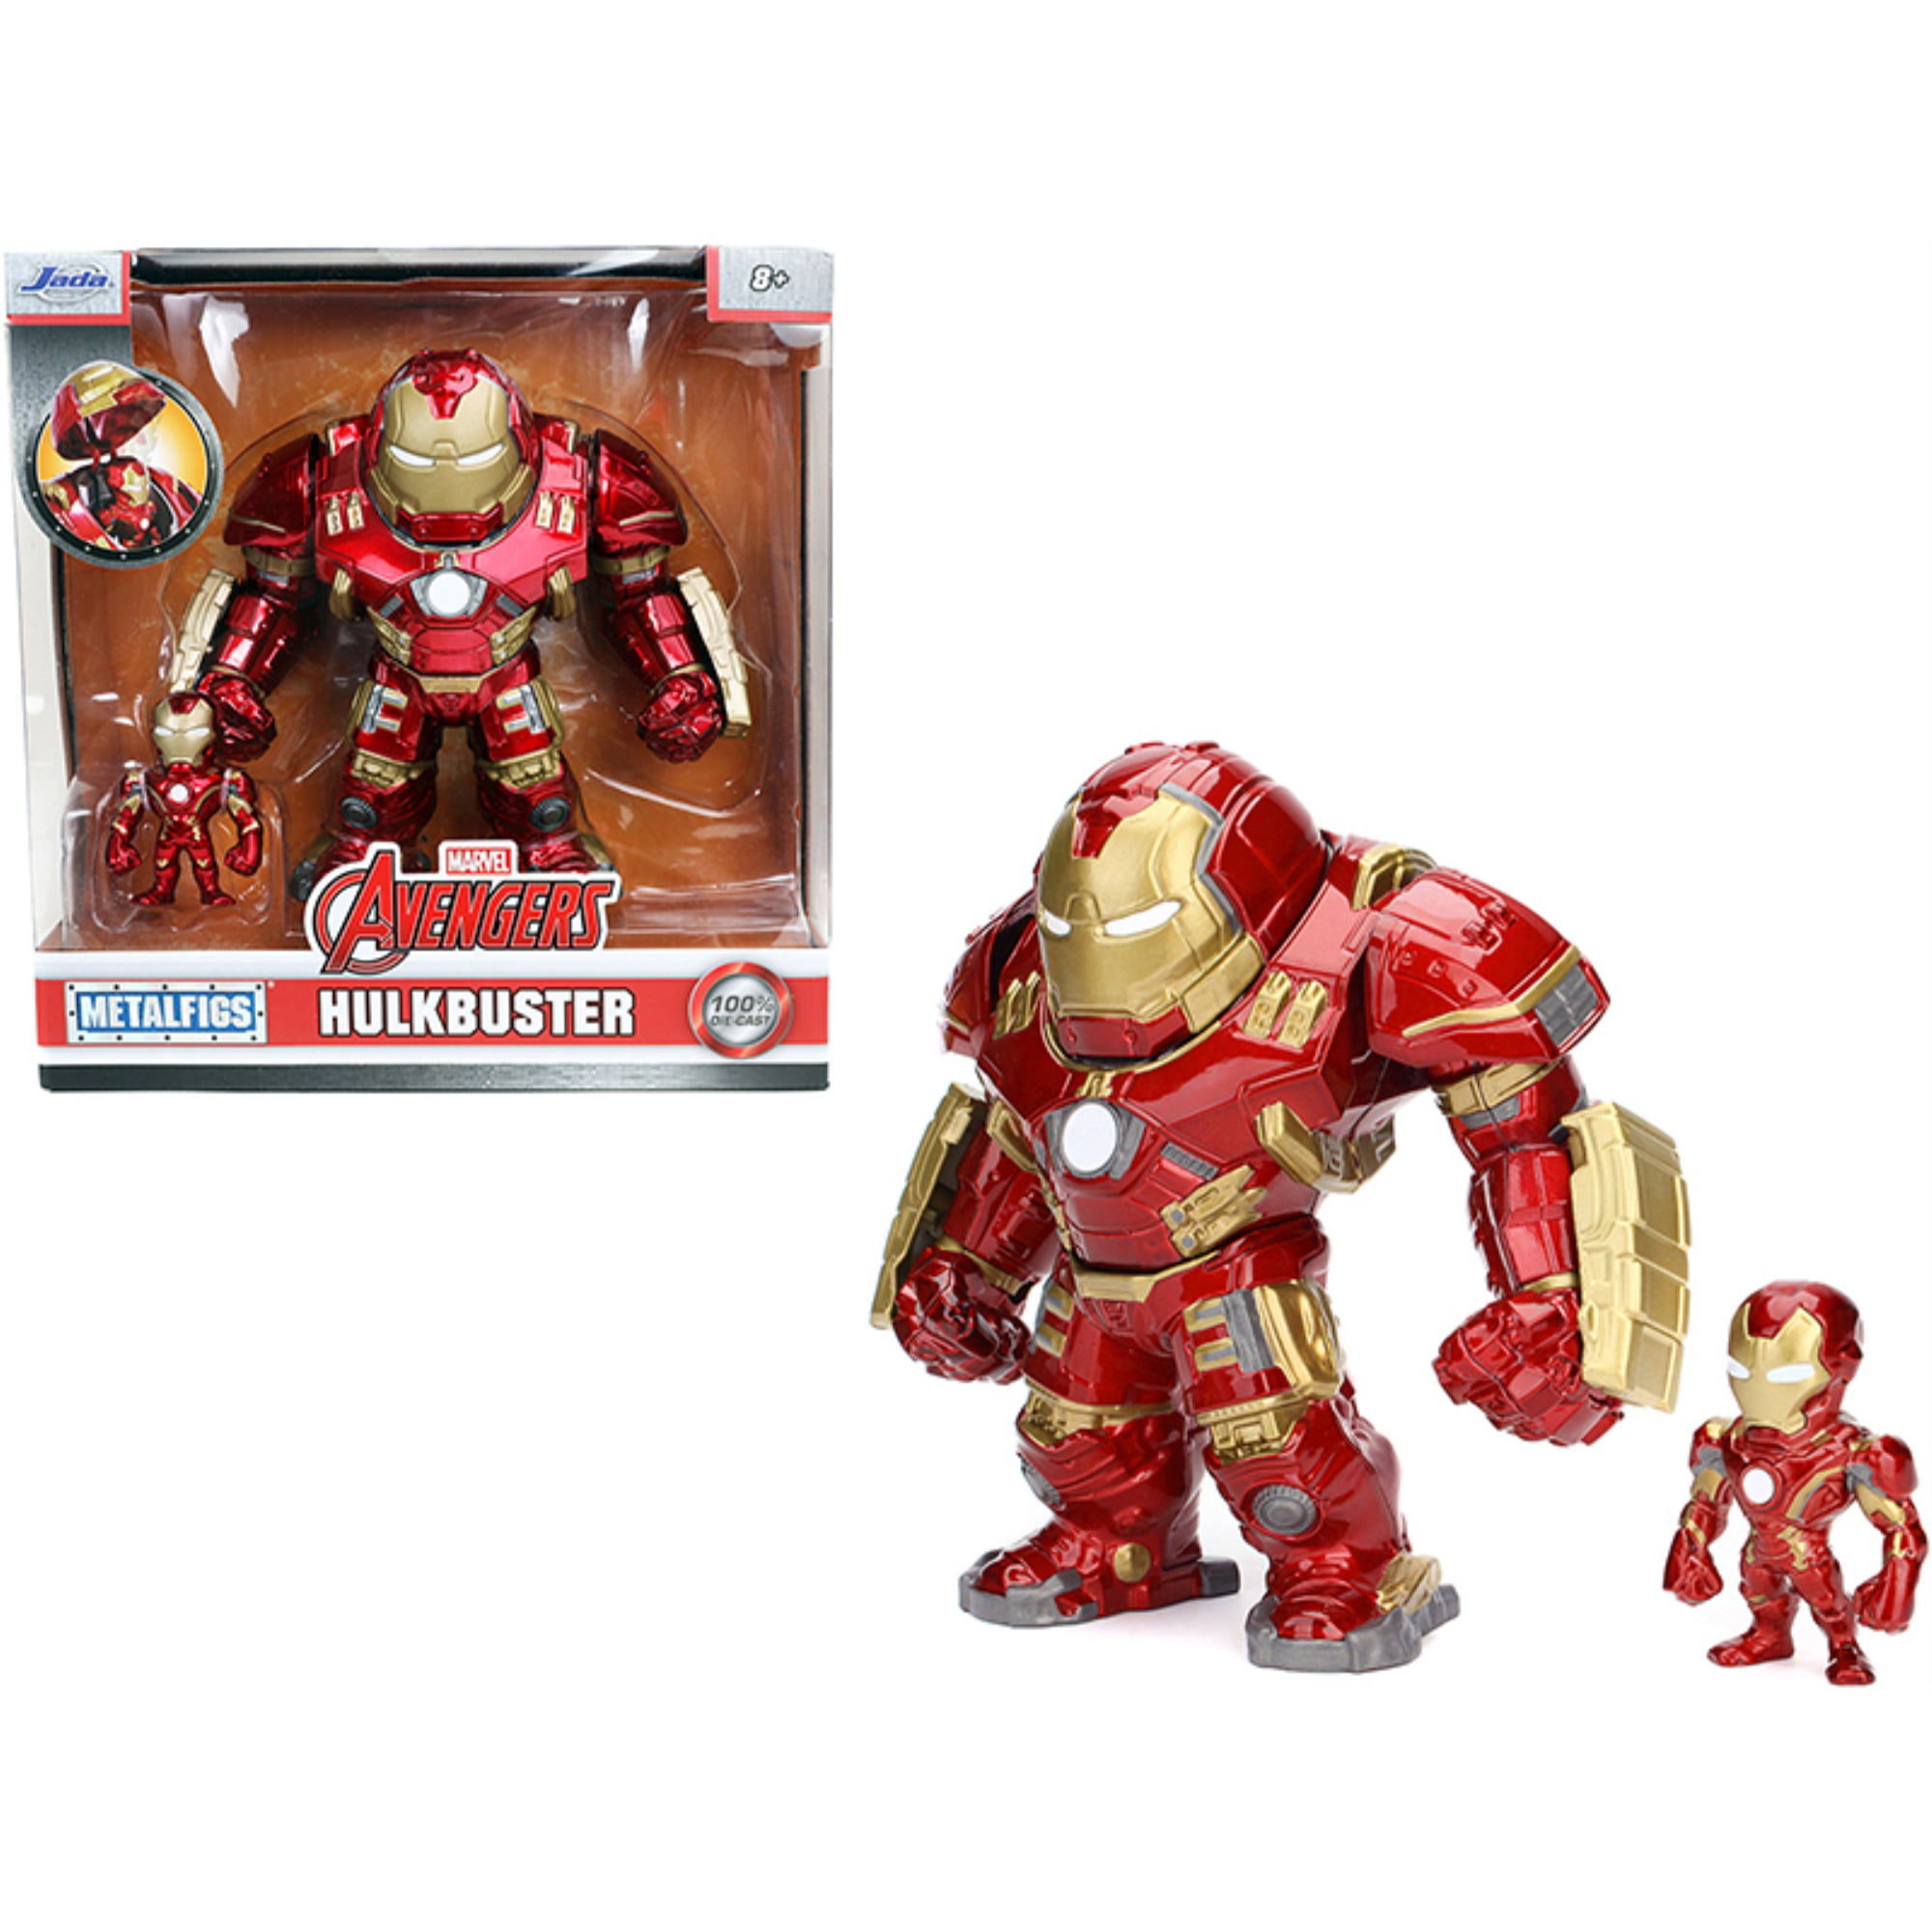 Iron Man Hulkbuster action figure Marvel heroes Avengers collectible model toy 